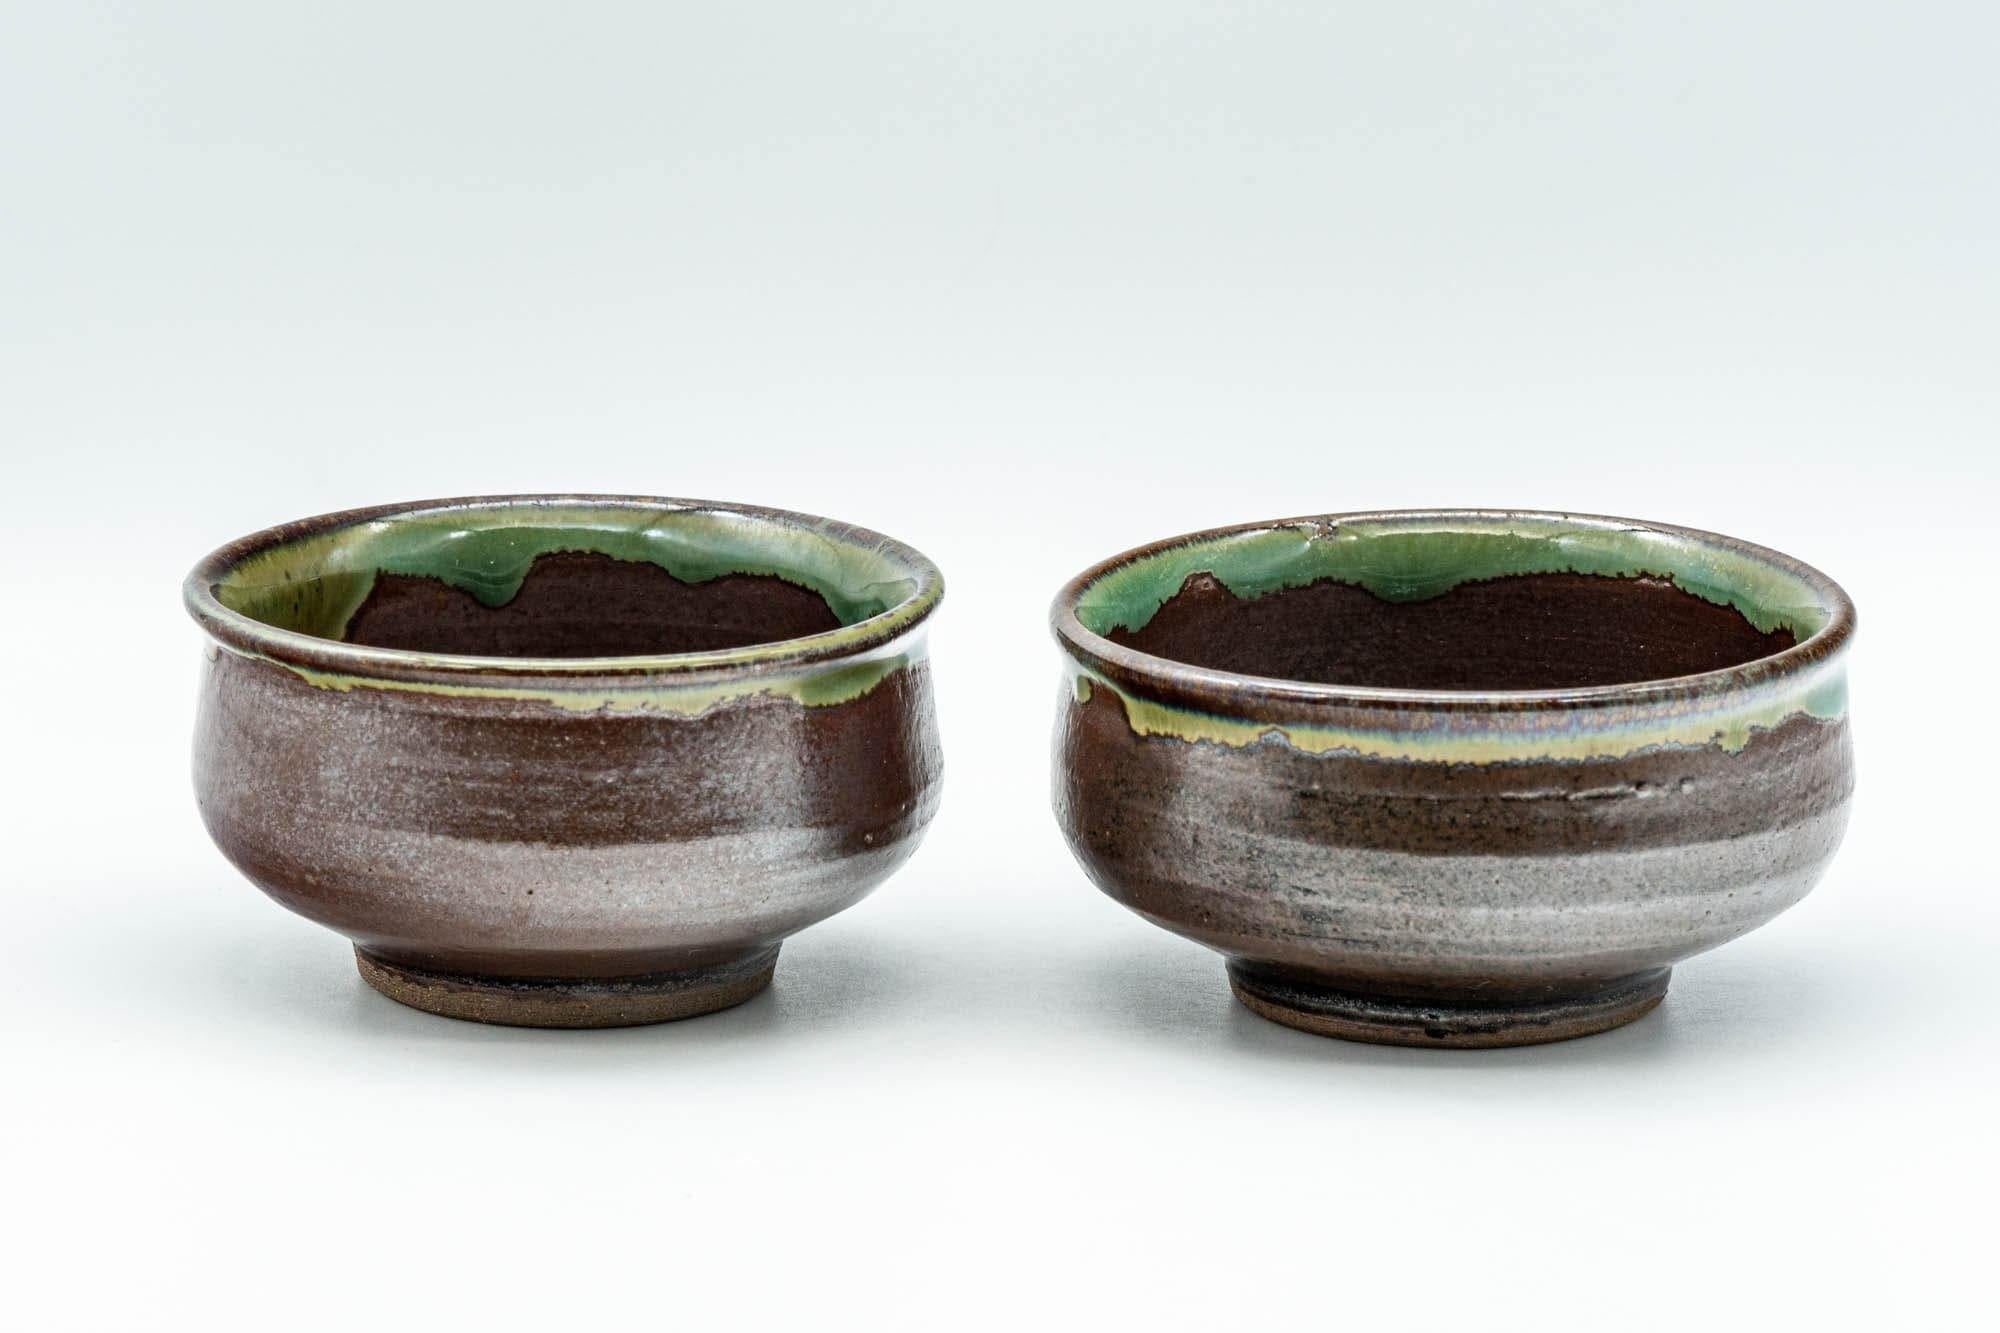 Japanese Teacups - Pair of Brown and Green Drip-Glazed Yunomi - 100ml - Tezumi